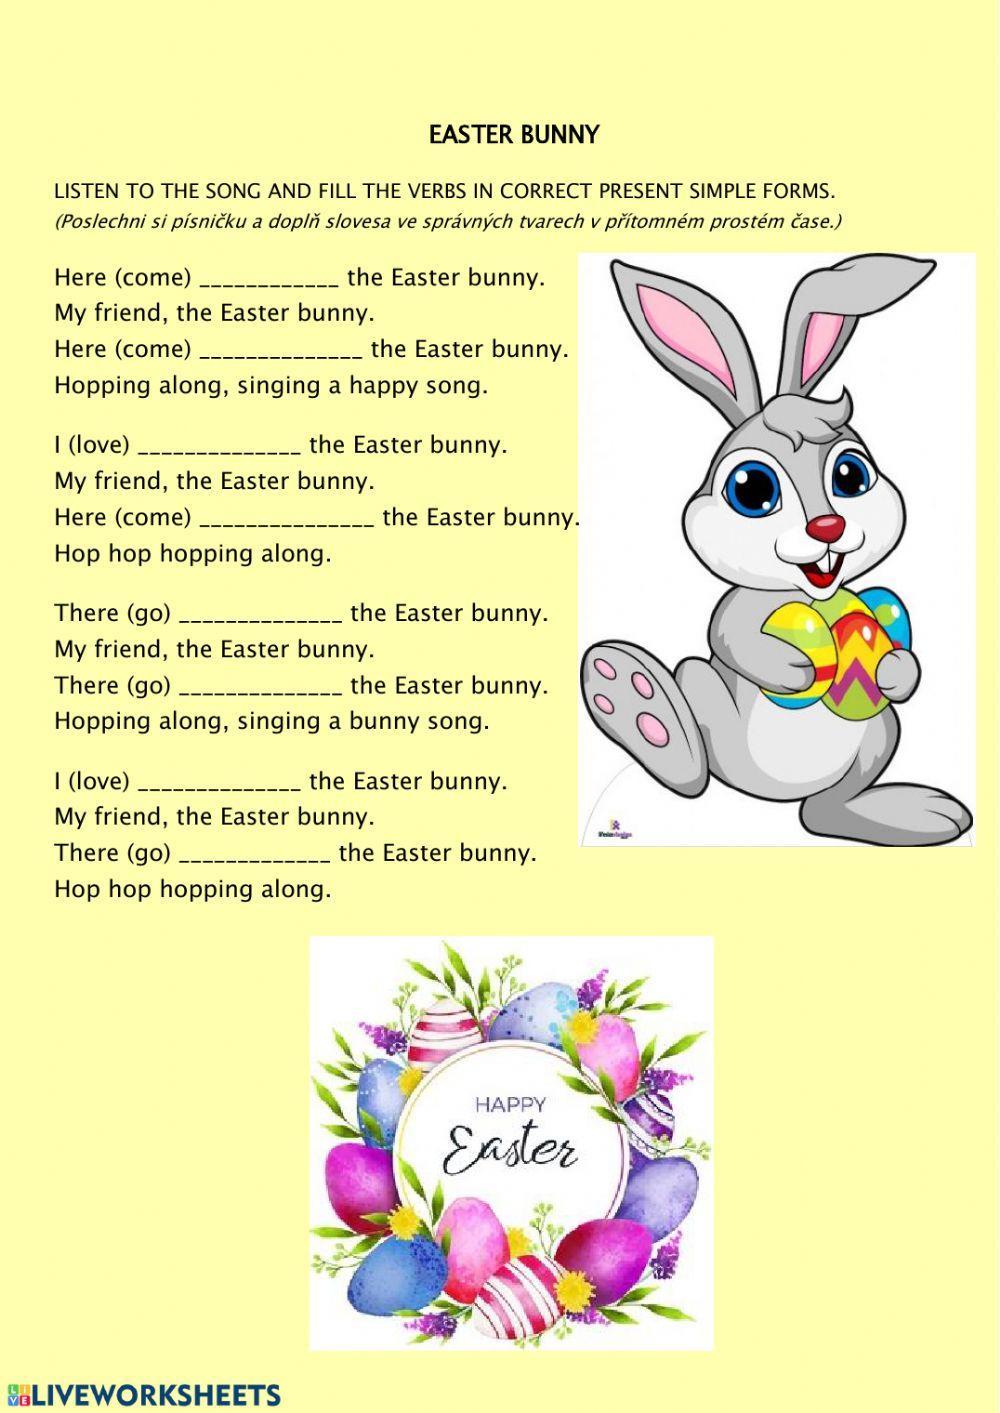 Easter Bunny song